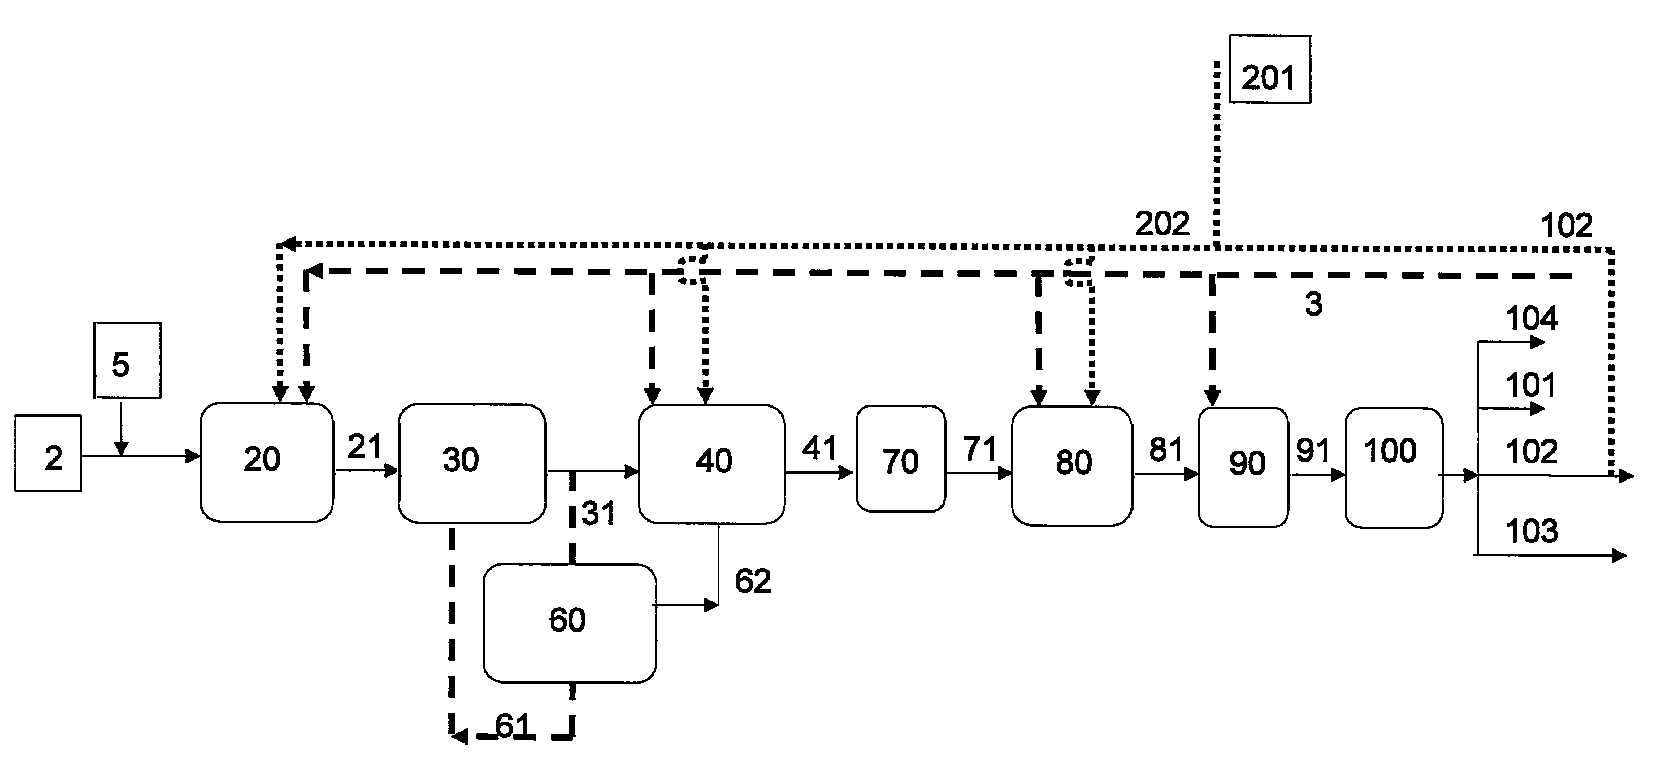 Process for producing a branched hydrocarbon base oil from a feedstock containing aldehyde and/or ketone